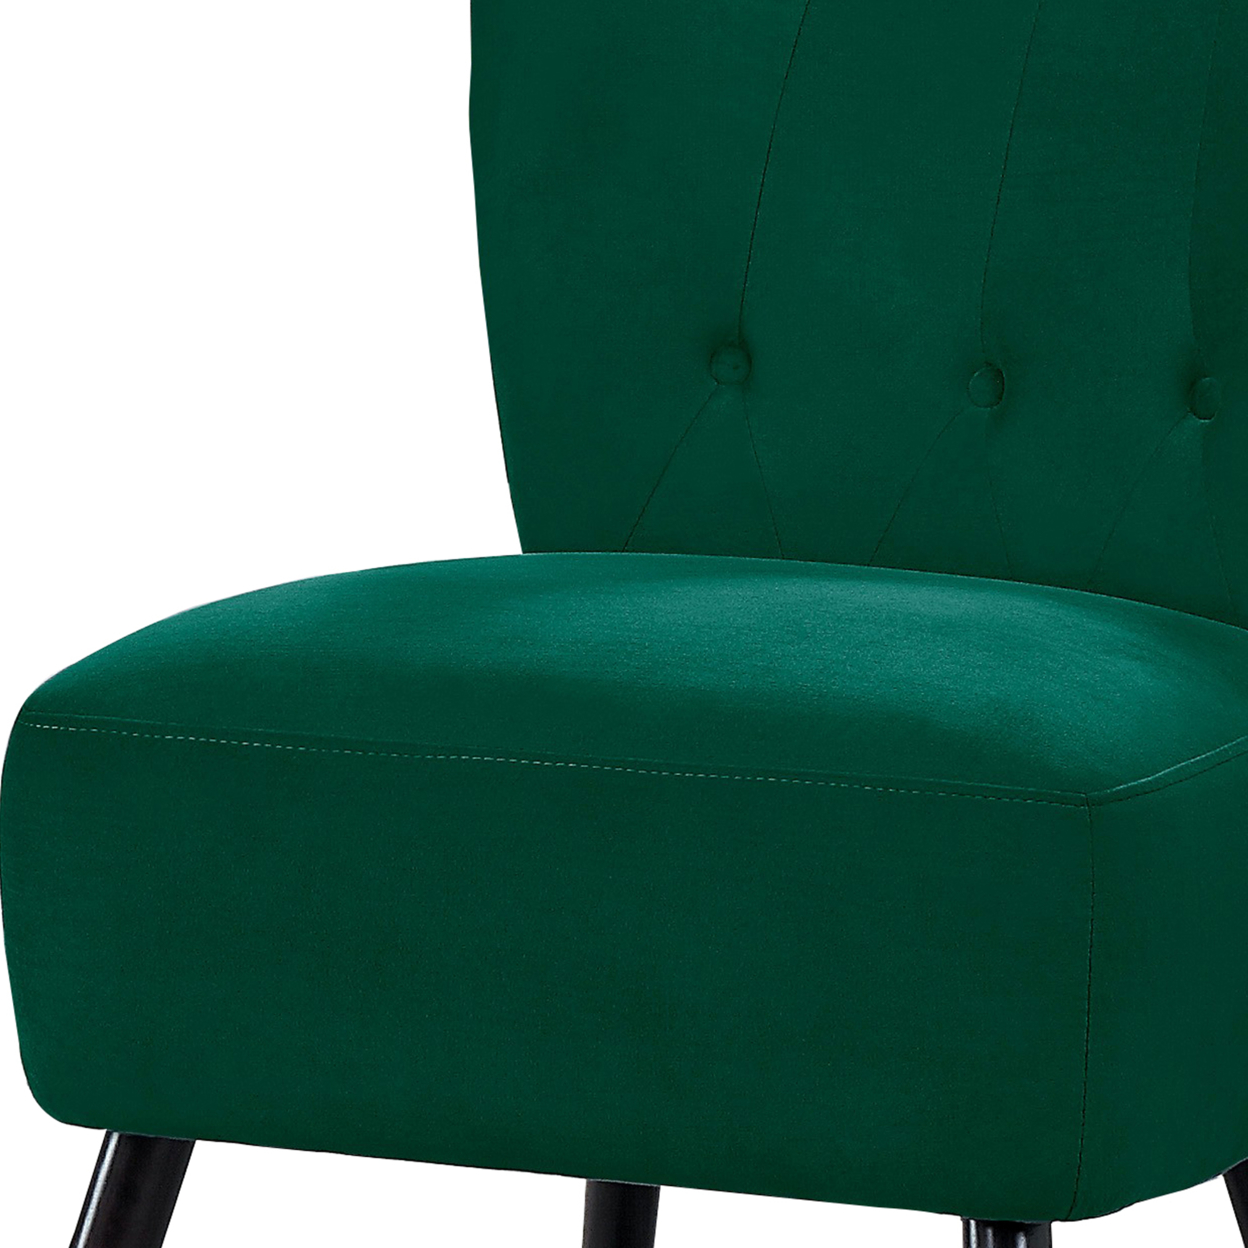 Upholstered Armless Accent Chair With Flared Back And Button Tufting, Green- Saltoro Sherpi